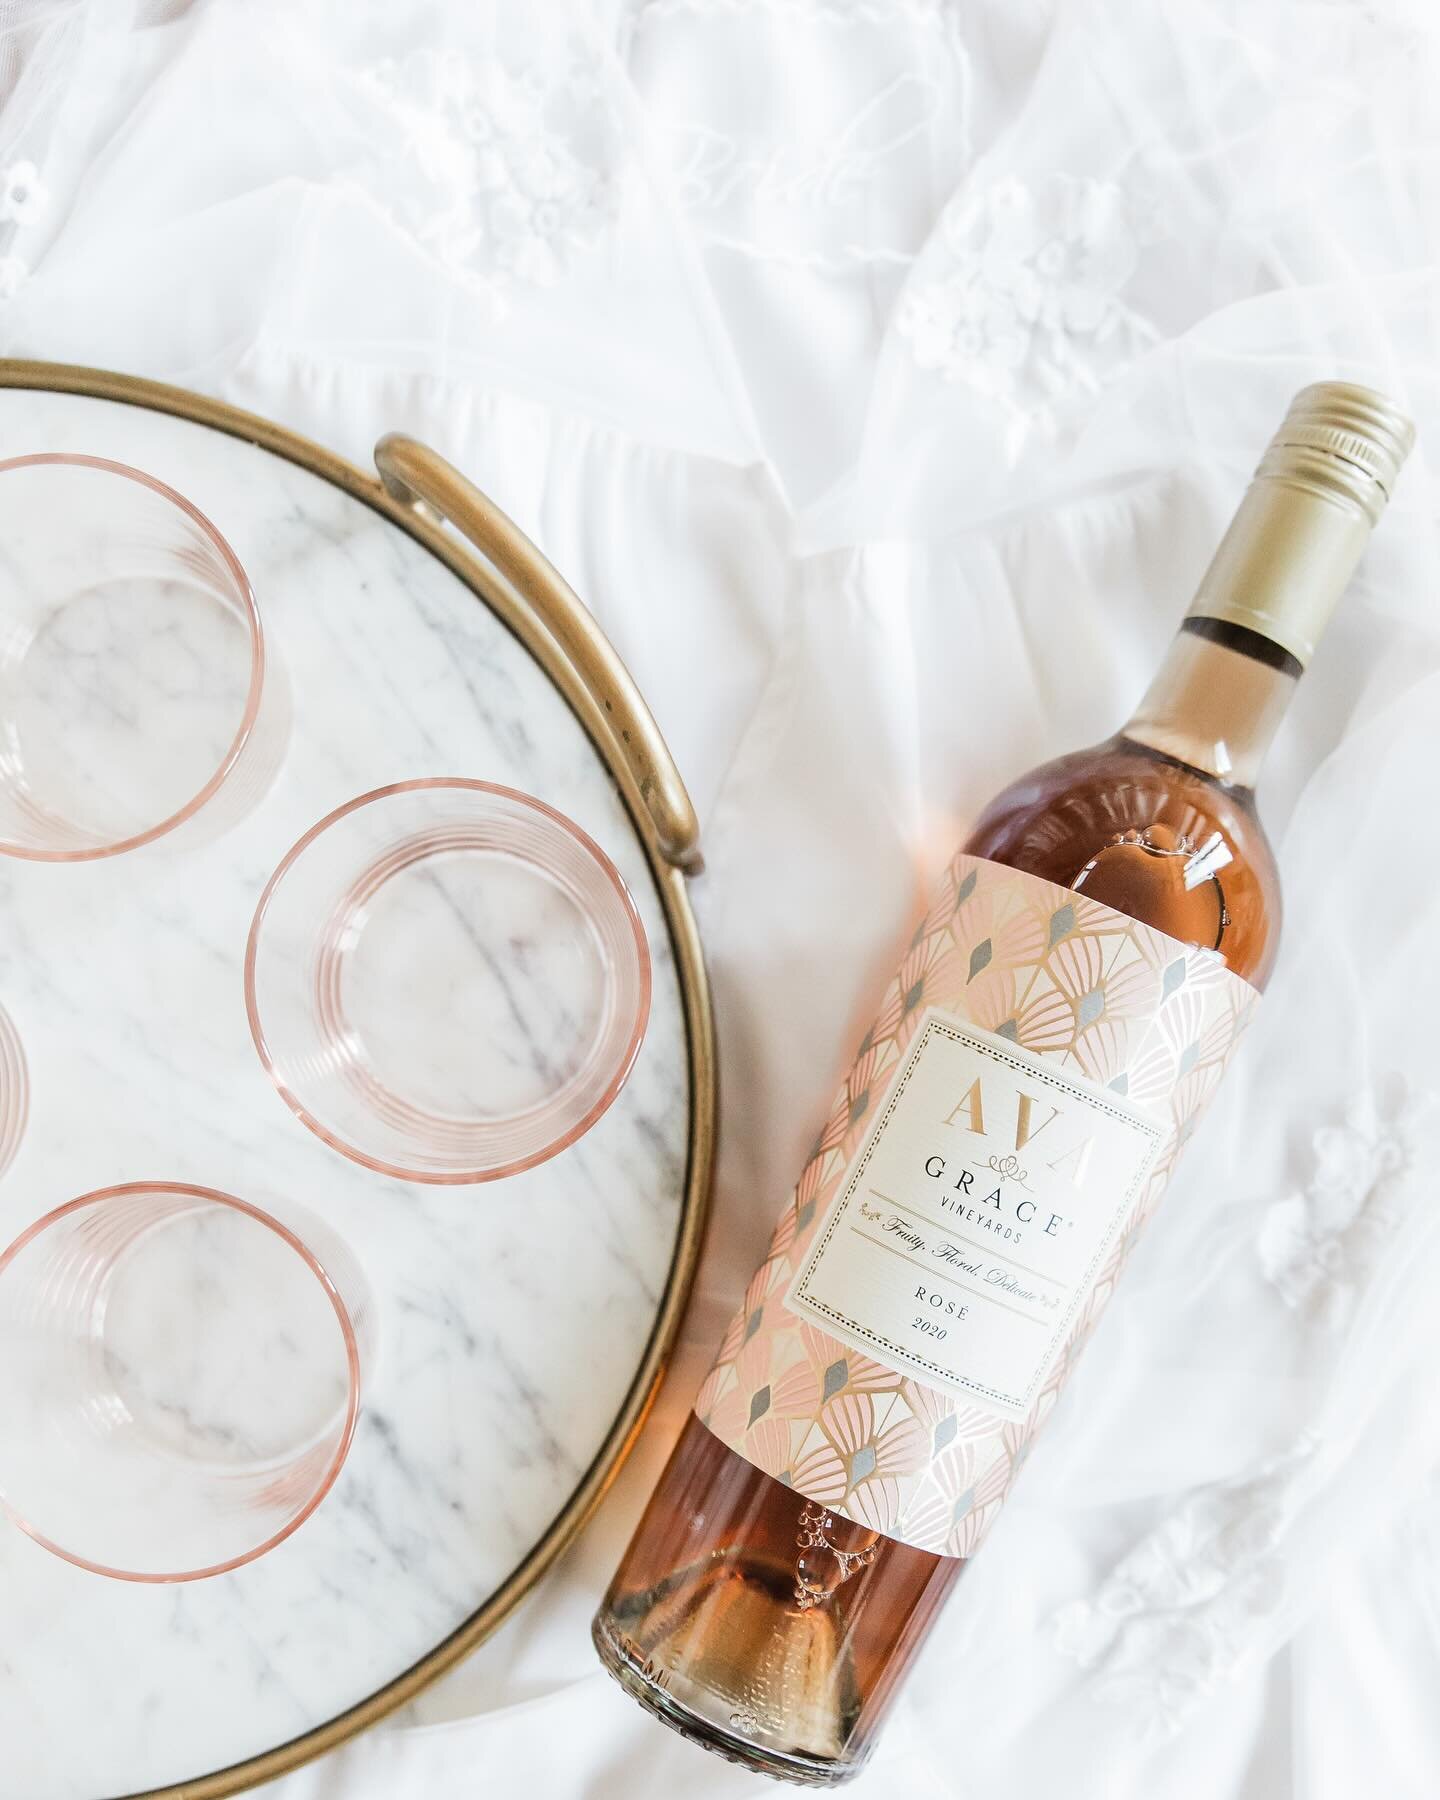 R O B E &amp;  R O S &Eacute;
.
.
The most fun way to add that little something extra to your LRB experience. We&rsquo;ll greet you with the prettiest robe + refreshing ros&eacute; for your whole group to sip on throughout your time with us! It makes